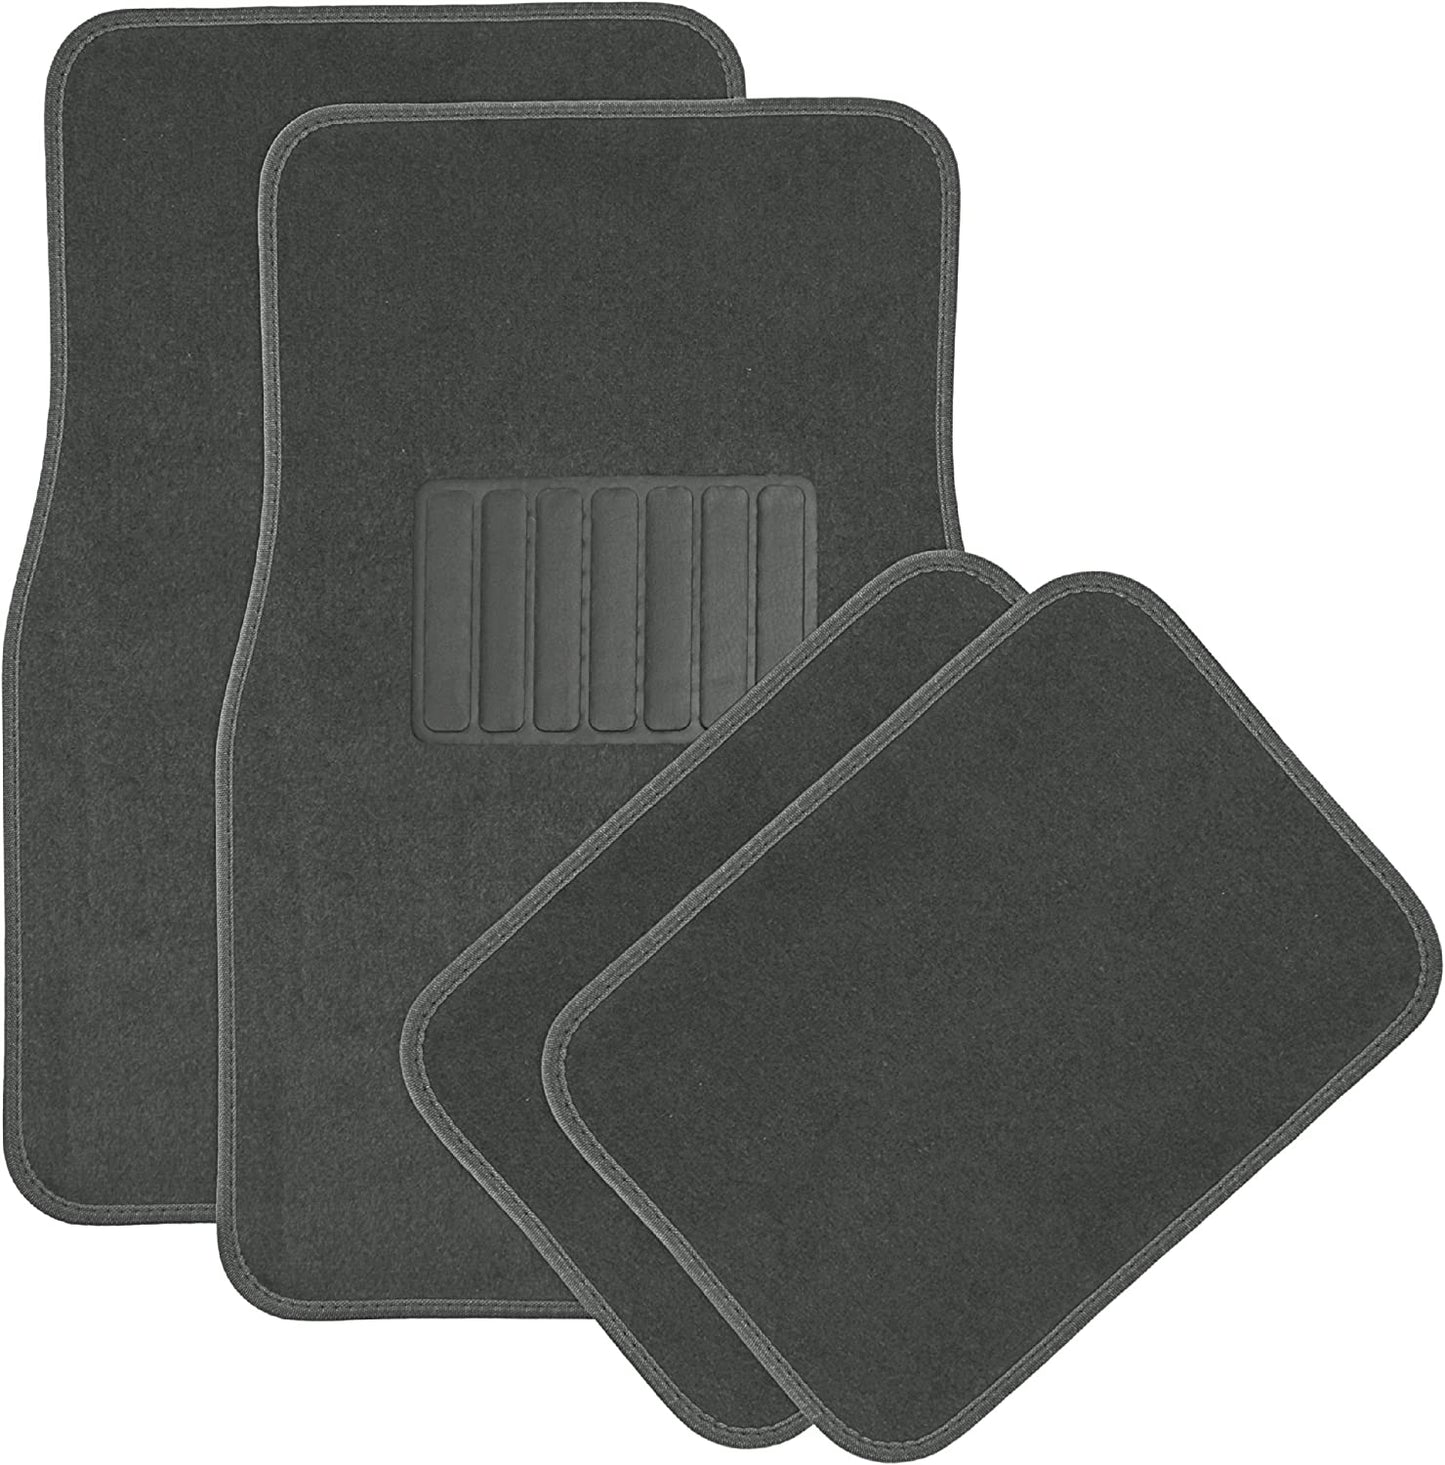 4 Piece Luxe Carpet-Floor-Mats Set for Car - Rubber-Lined All-Weather Heavy-Duty Protection for All Vehicles, Charcoal